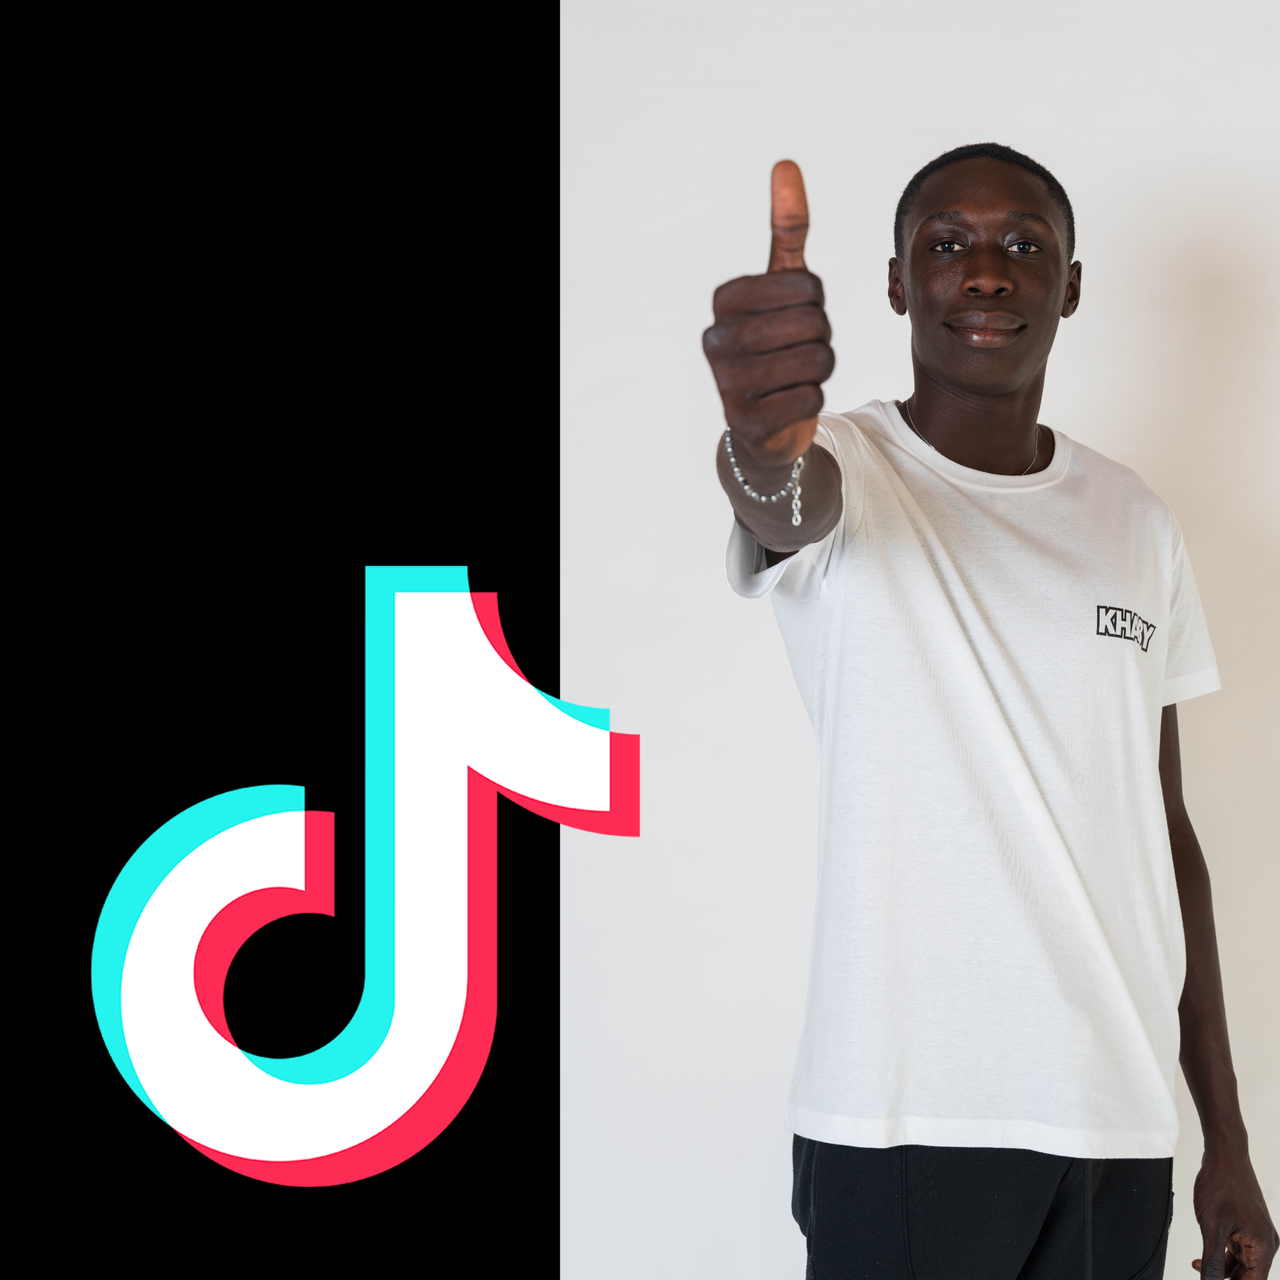 Congratulations to Khaby Lame for 100M followers, bringing joy to our  global community | TikTok Newsroom